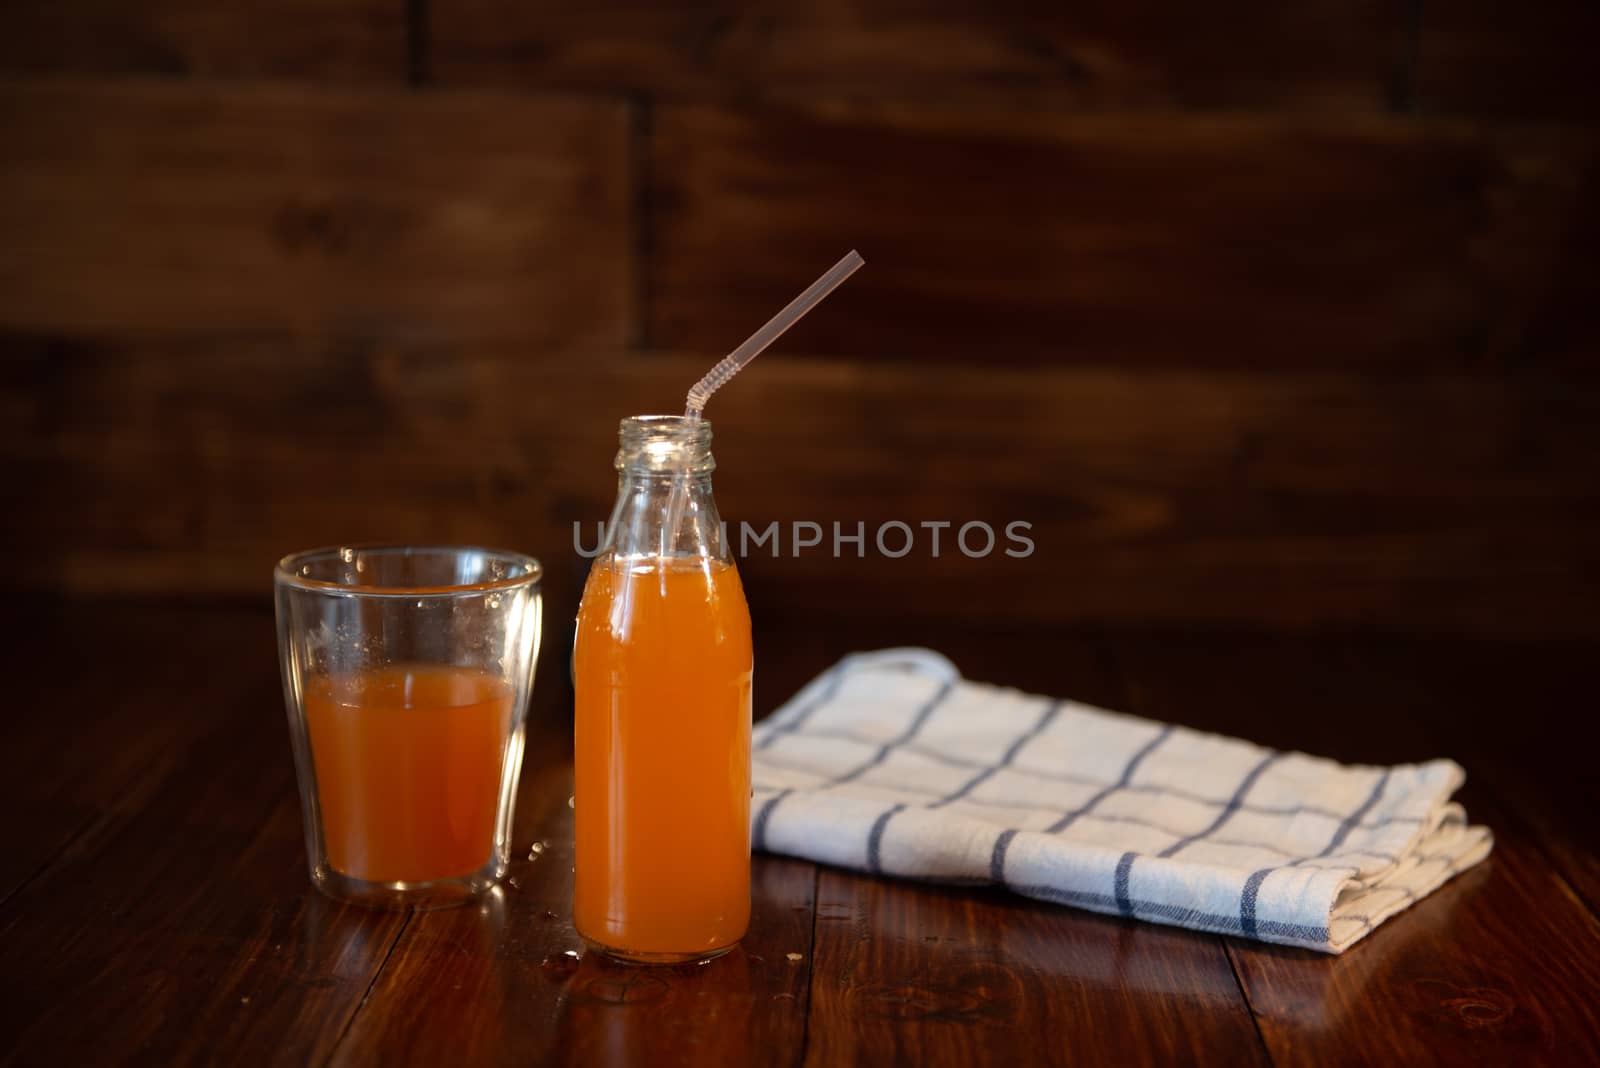 vintage bottle with juice, straw, and towel on wooden table.